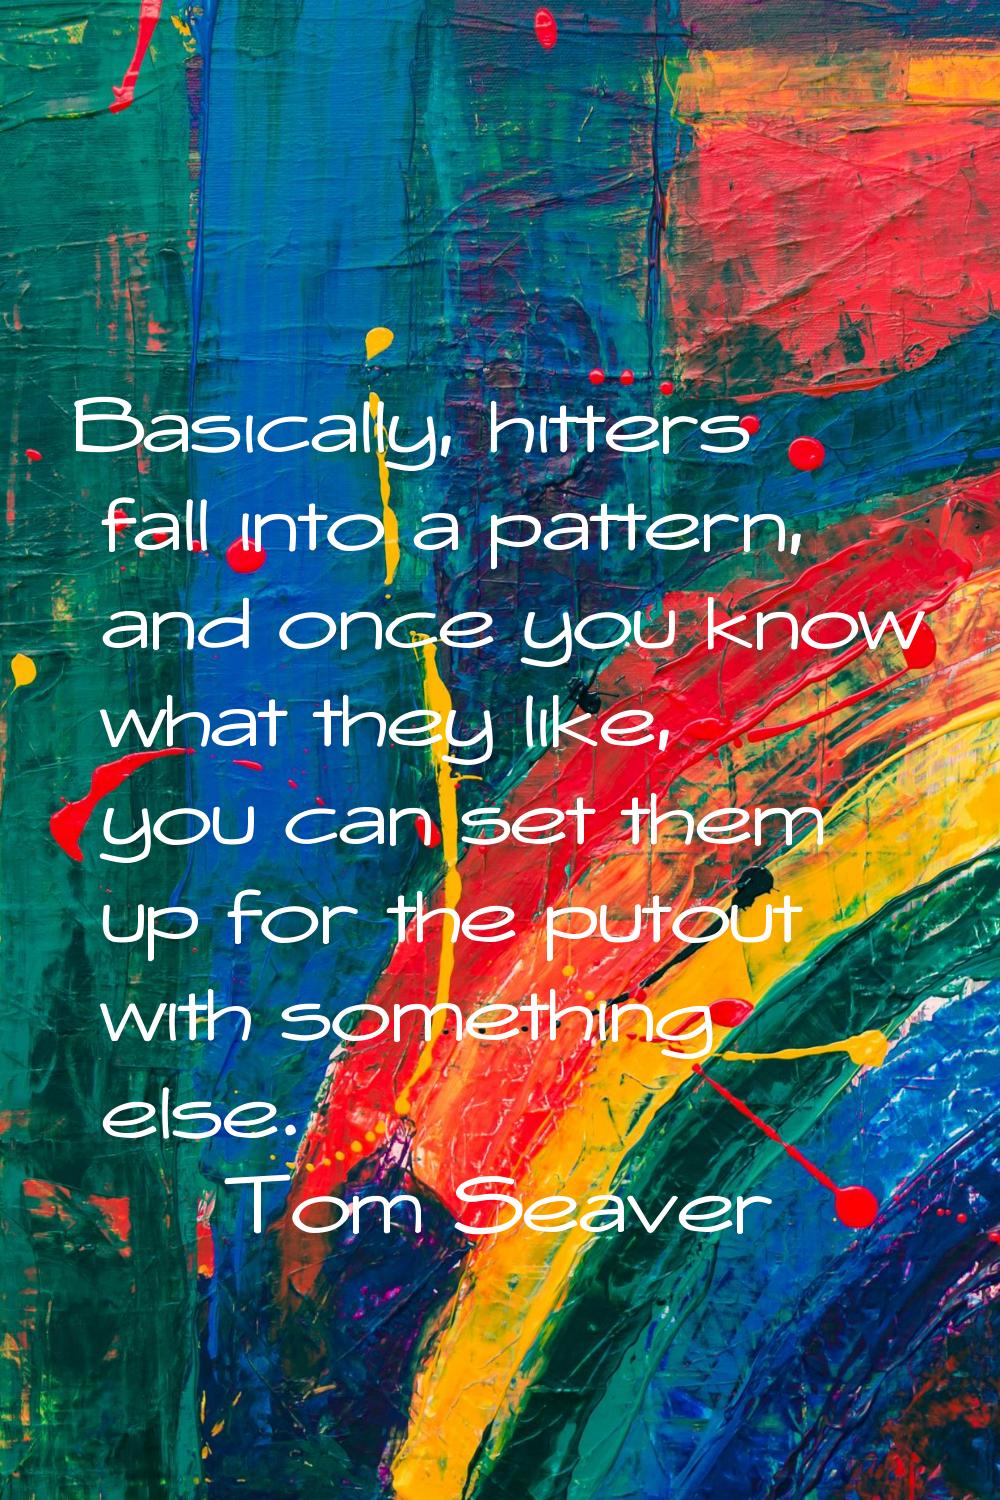 Basically, hitters fall into a pattern, and once you know what they like, you can set them up for t